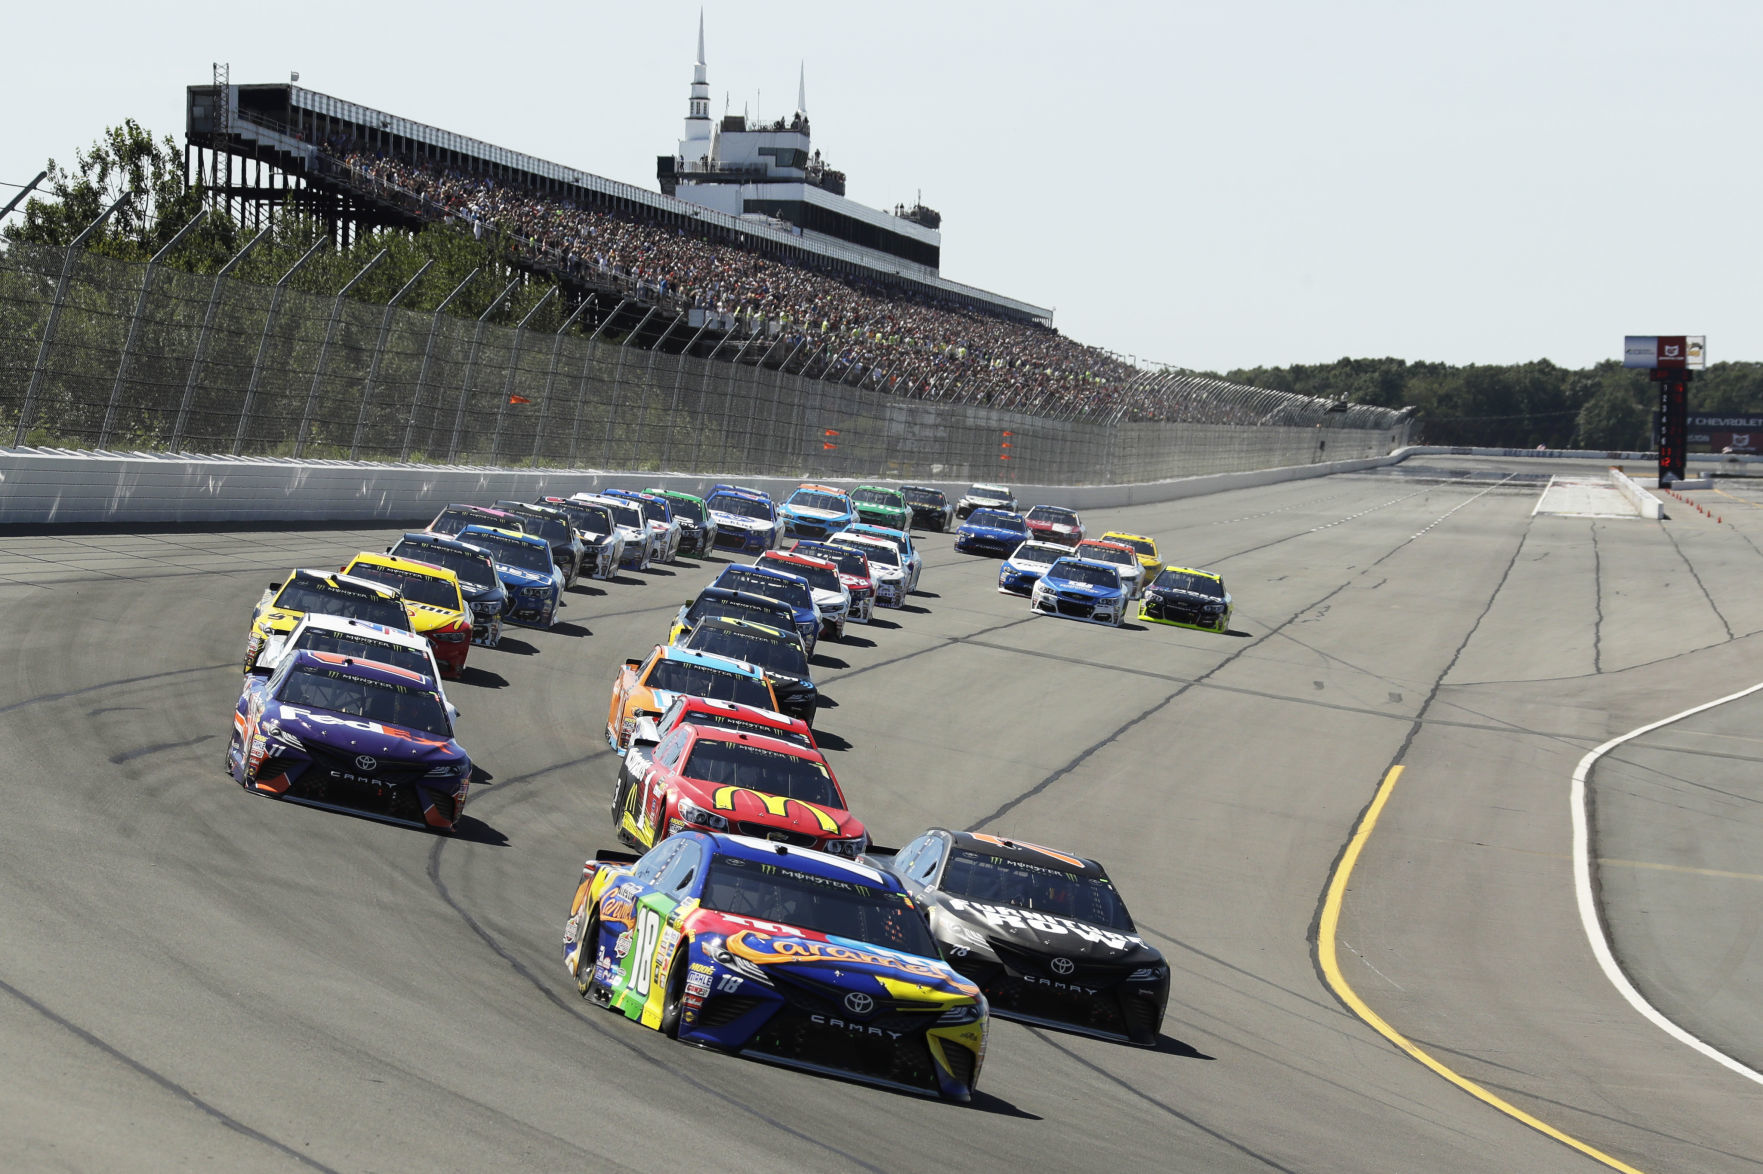 Wolf Pocono Raceway may have to resume races without fans